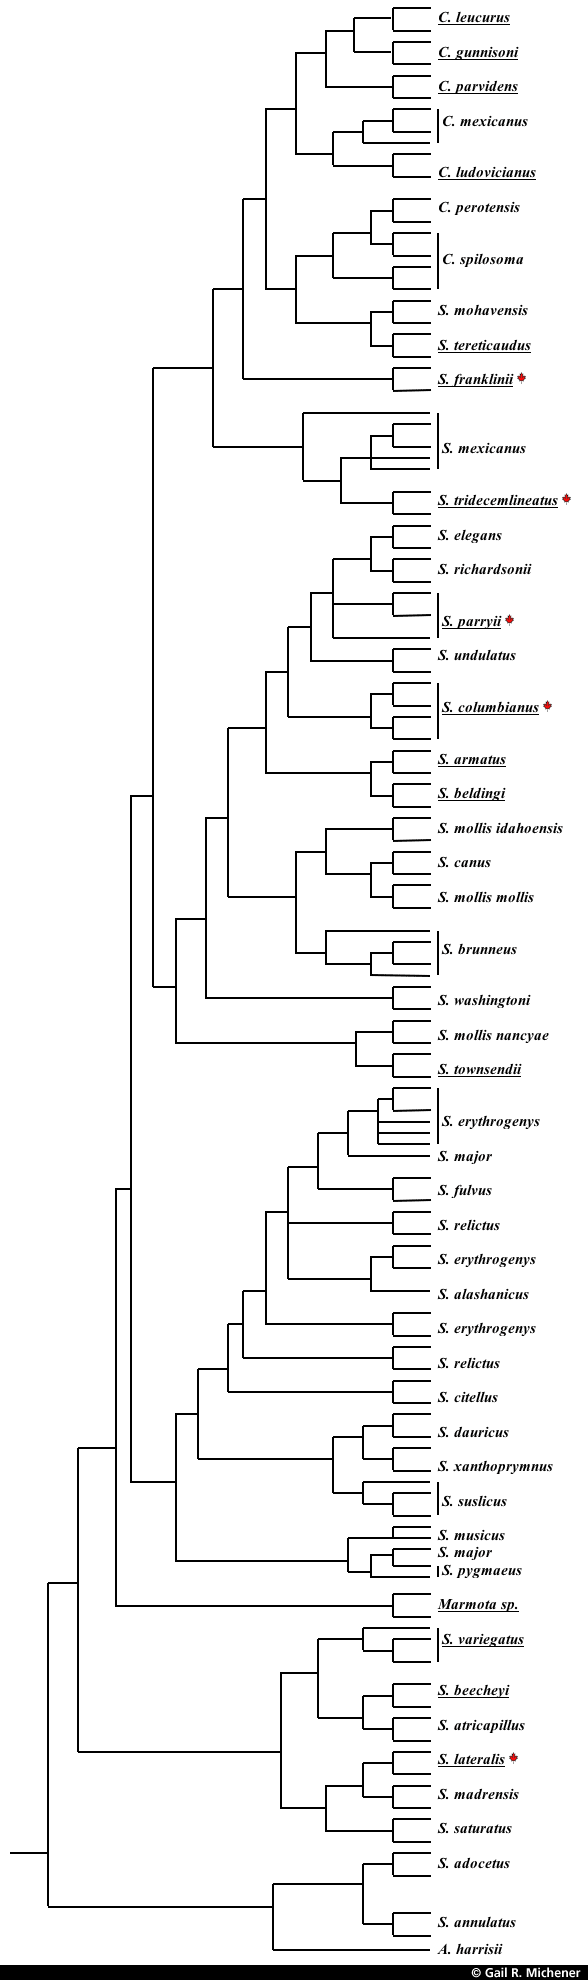 Phylogenetic tree of squirrel species http://research.uleth.ca/rgs/photos/phylogeneticTree.gif